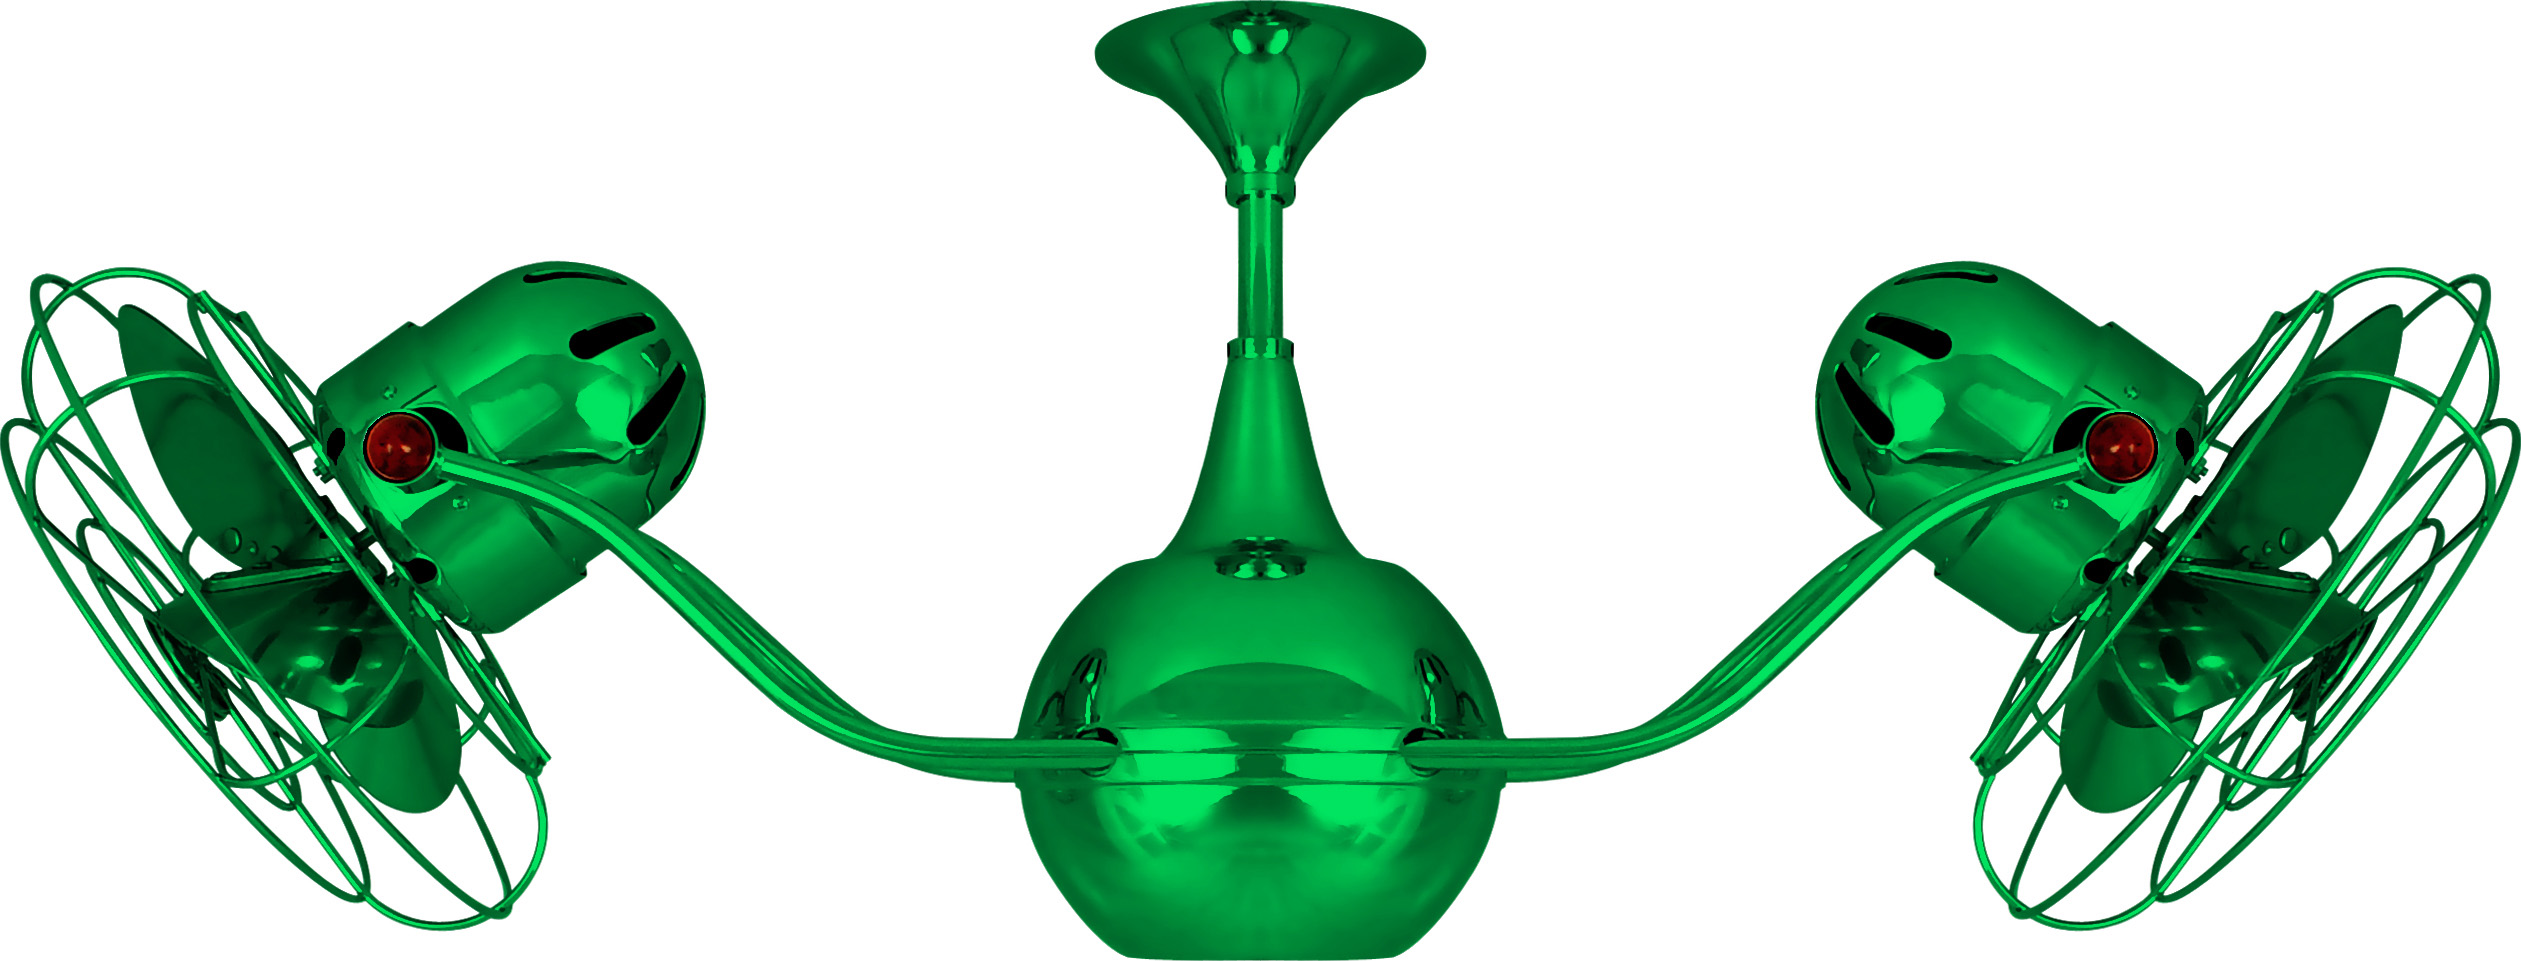 Vent-Bettina Rotational Dual Head Ceiling Fan in Esmeralda / Green Finish with Metal Blades and Decorative Cage